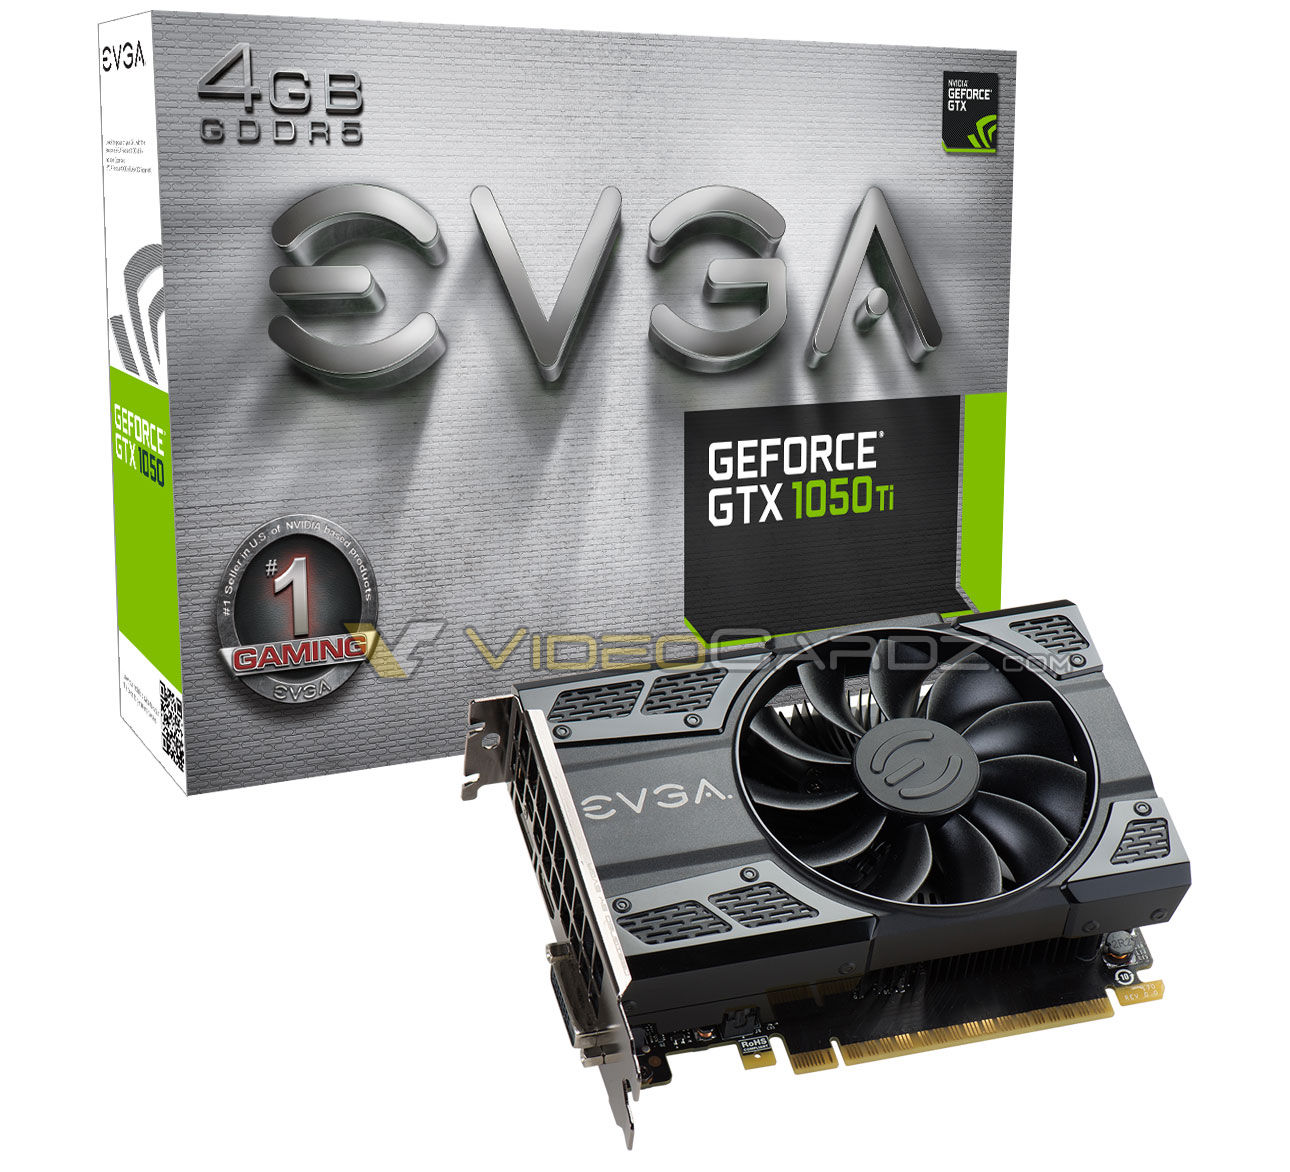 Nvidia 750 Ti Price 9 Images Nvidia Launches Geforce Gtx 780 Ti Nvidia Announces Geforce Gtx 1050 Ti And Geforce Gtx 1050 Buy Corsair One A100 Compact Gaming Pc Online In